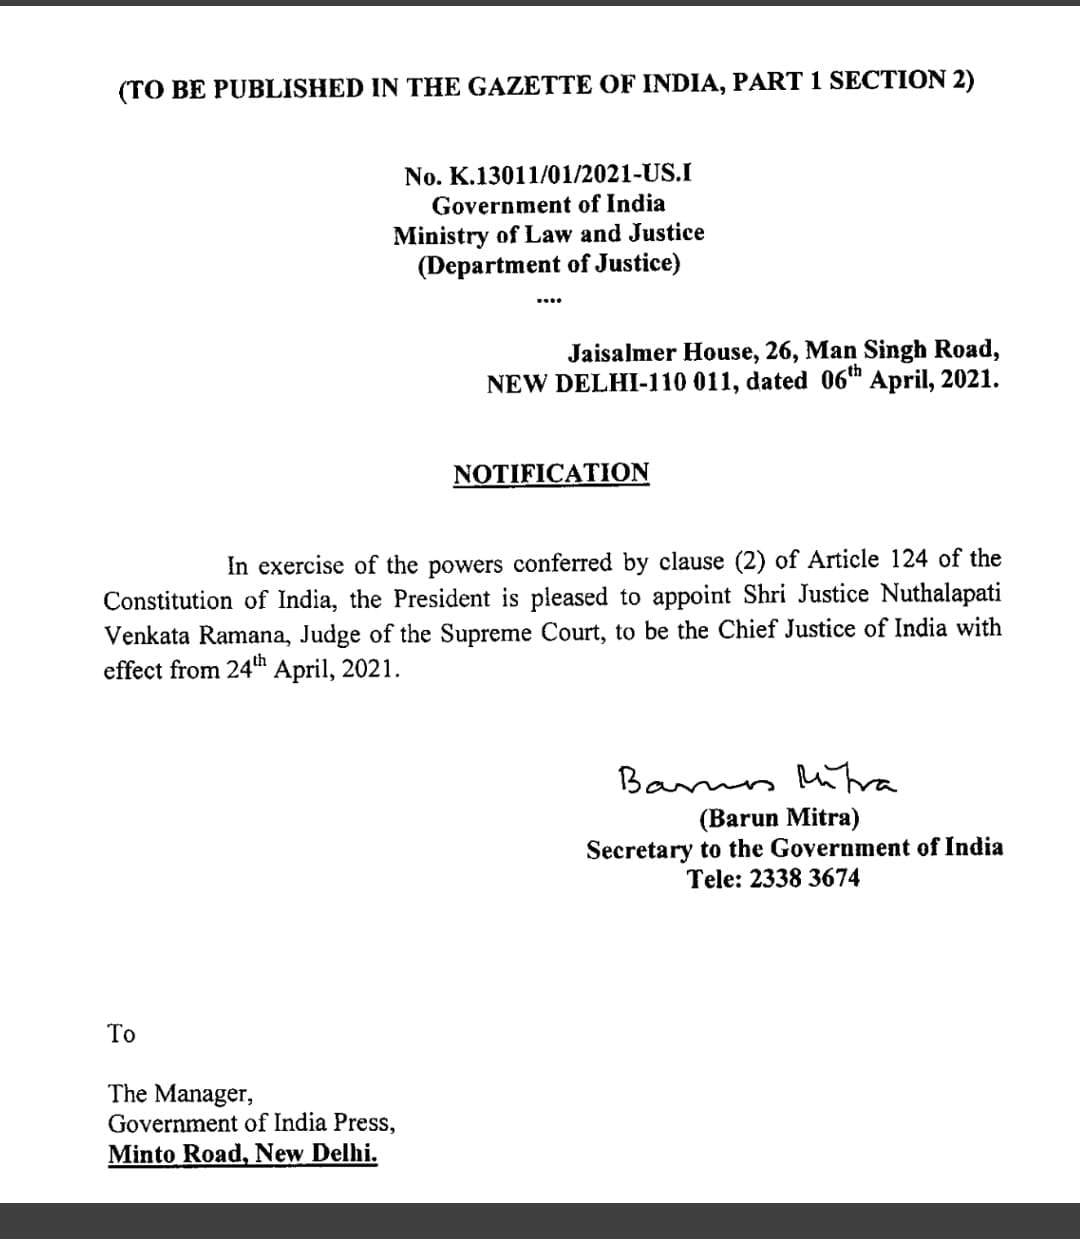 Justice Nv Ramana Formally Appointed As Next Cji To Assume Charge On April 24 Hindustan Times